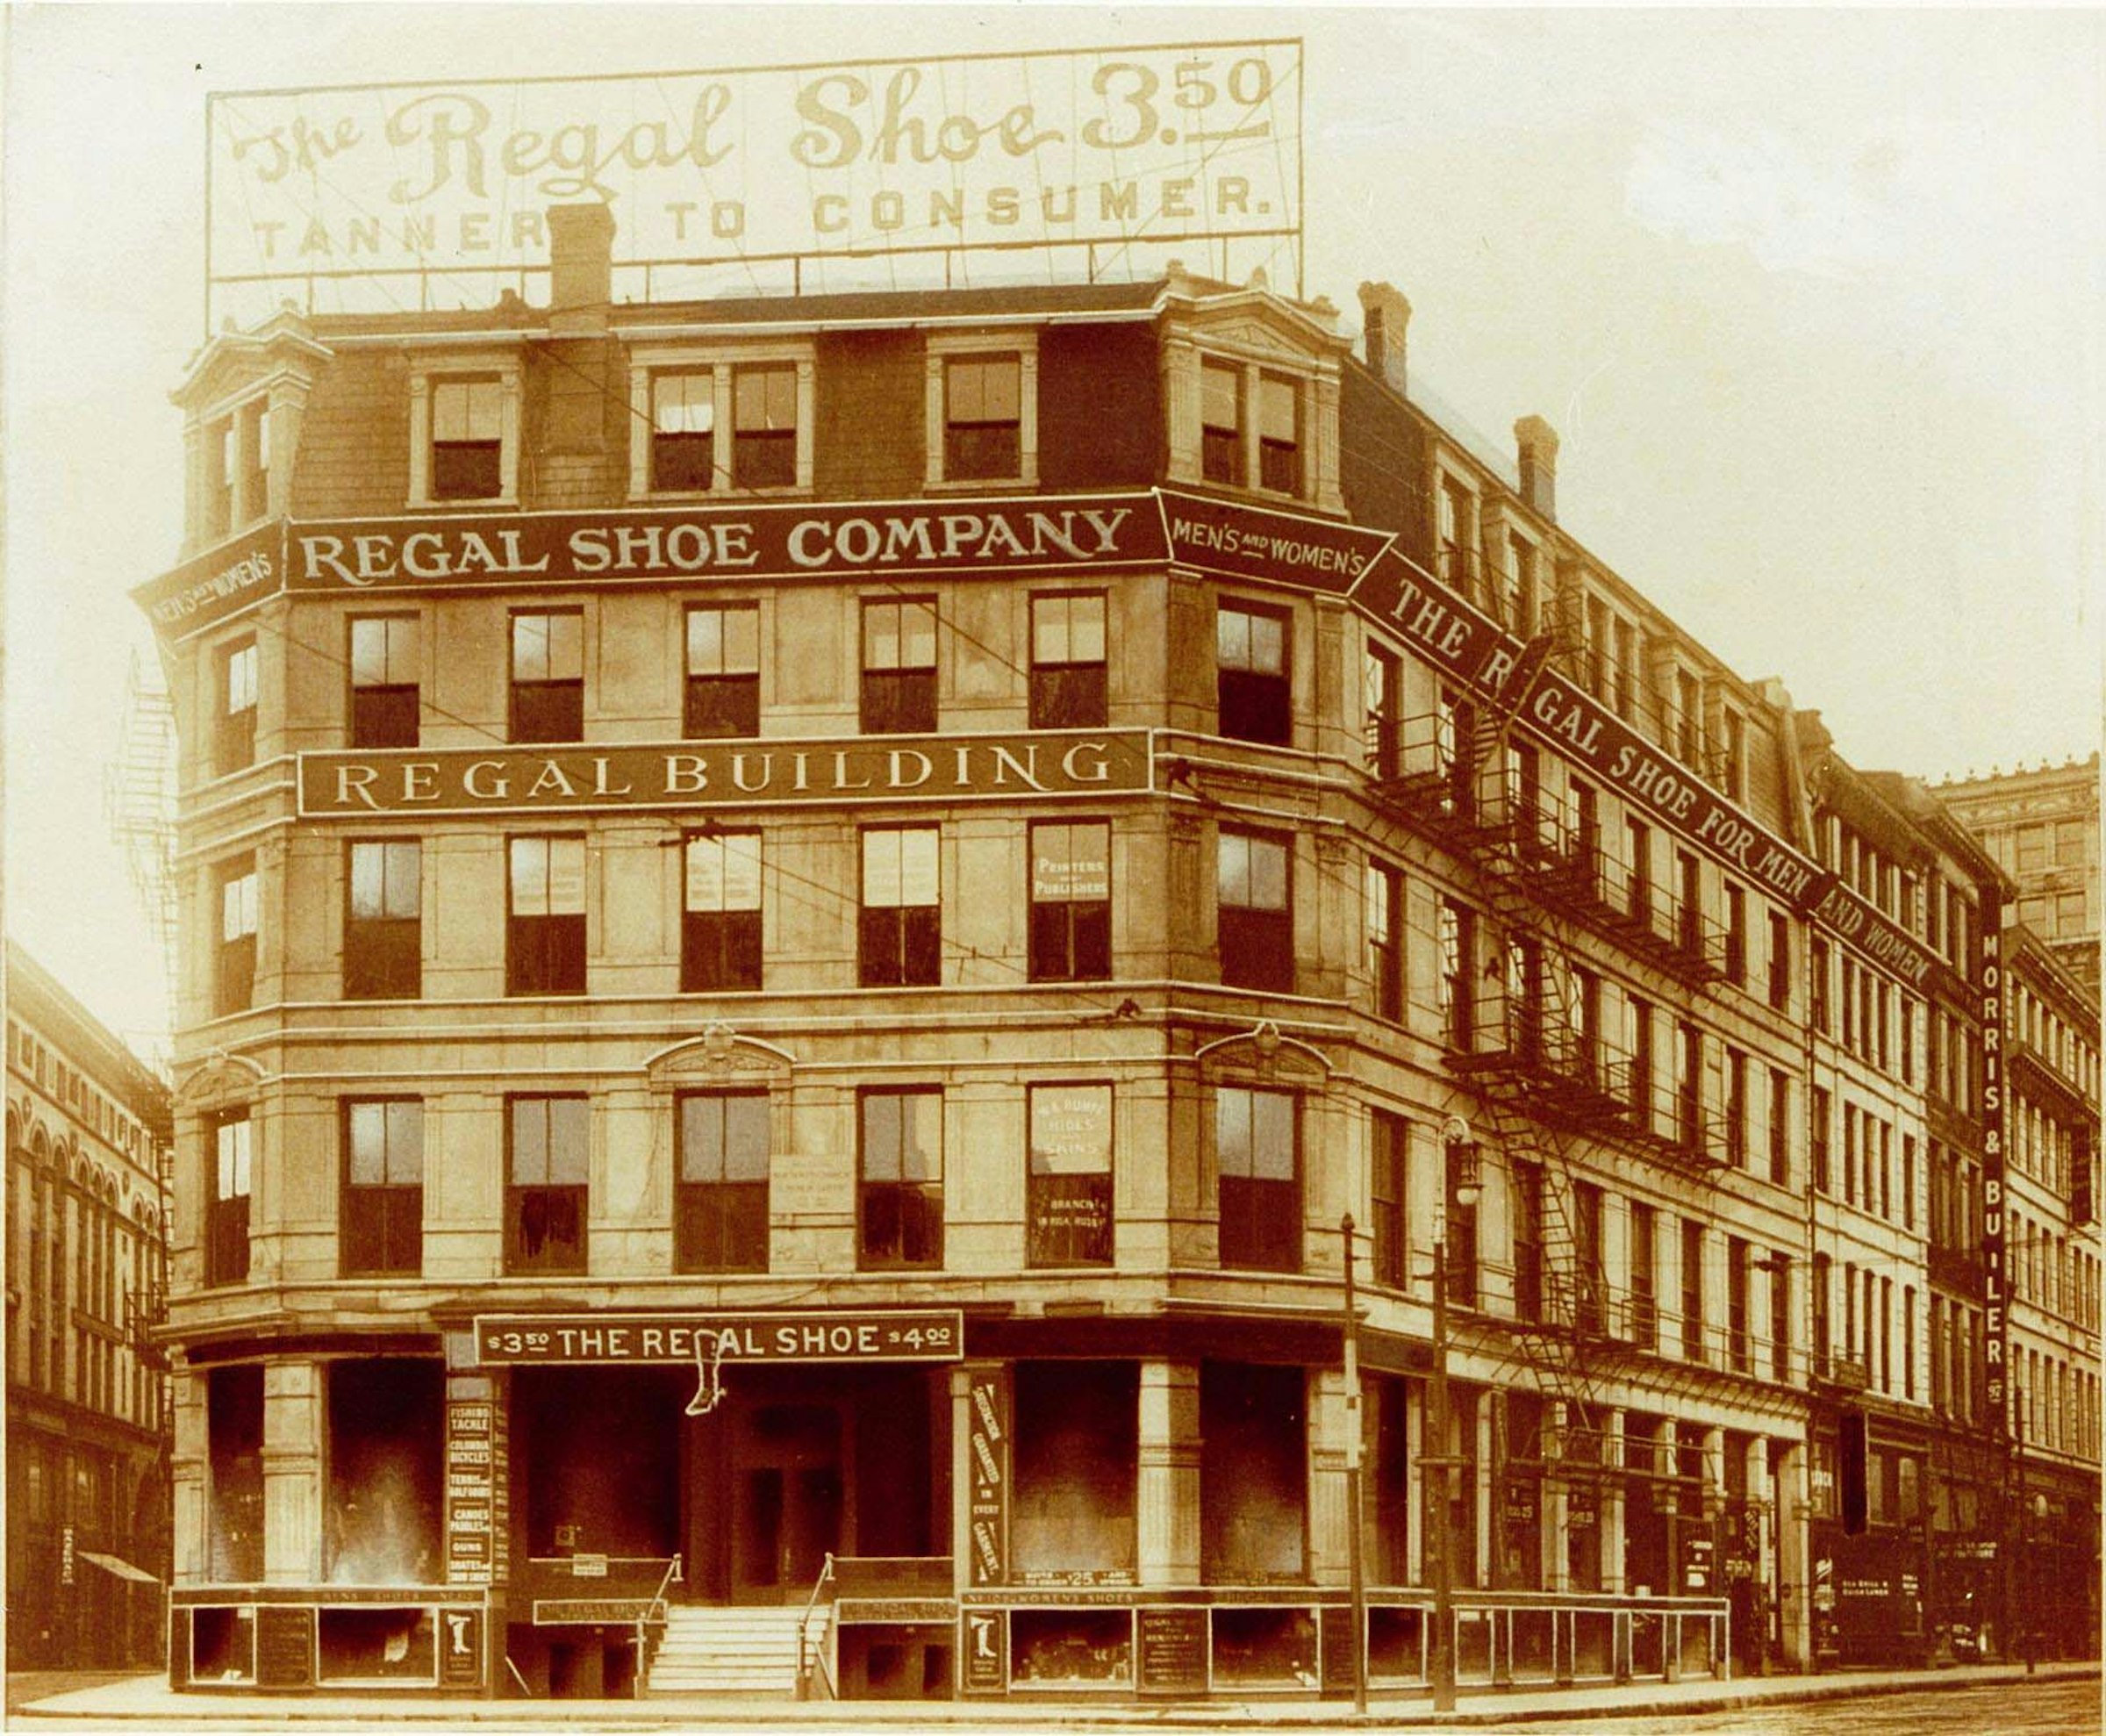 Old photo of the REGAL company building in America, date unknown